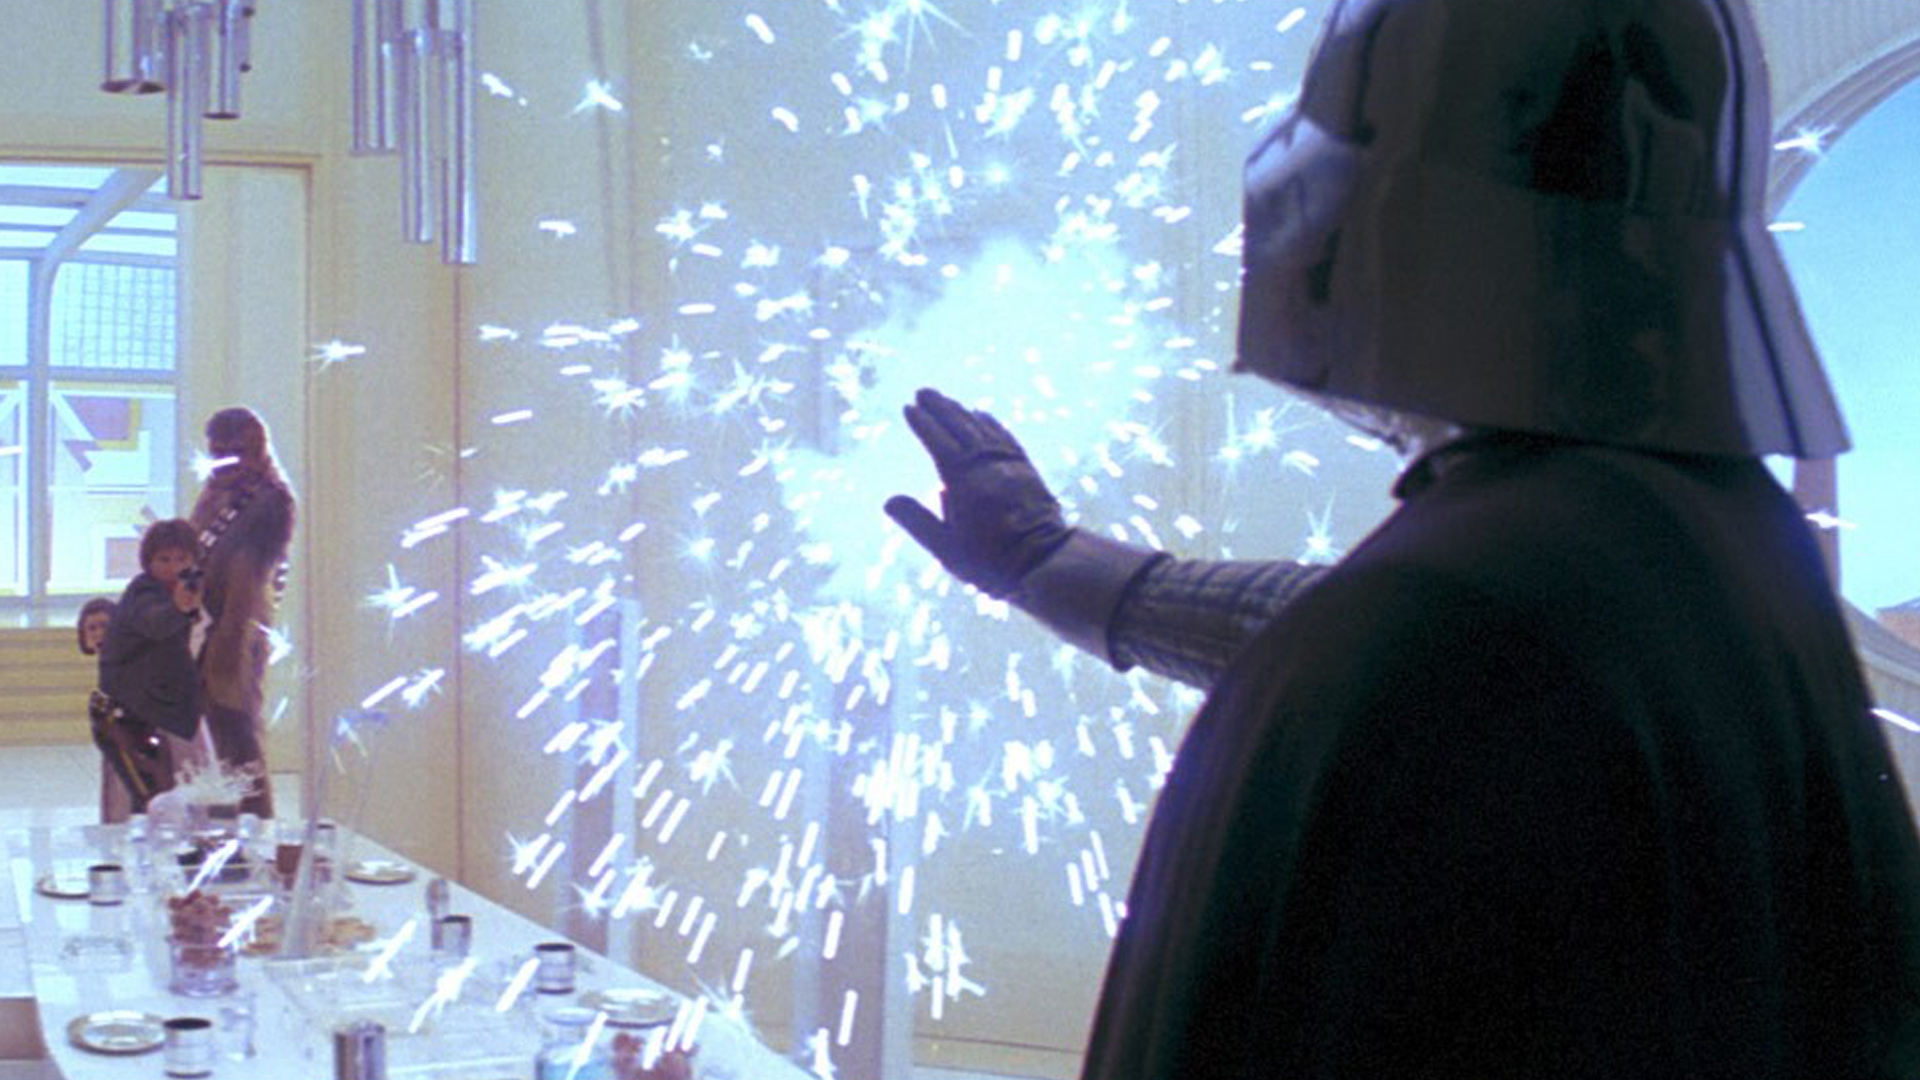 A scene from Star Wars: The Empire Strikes Back